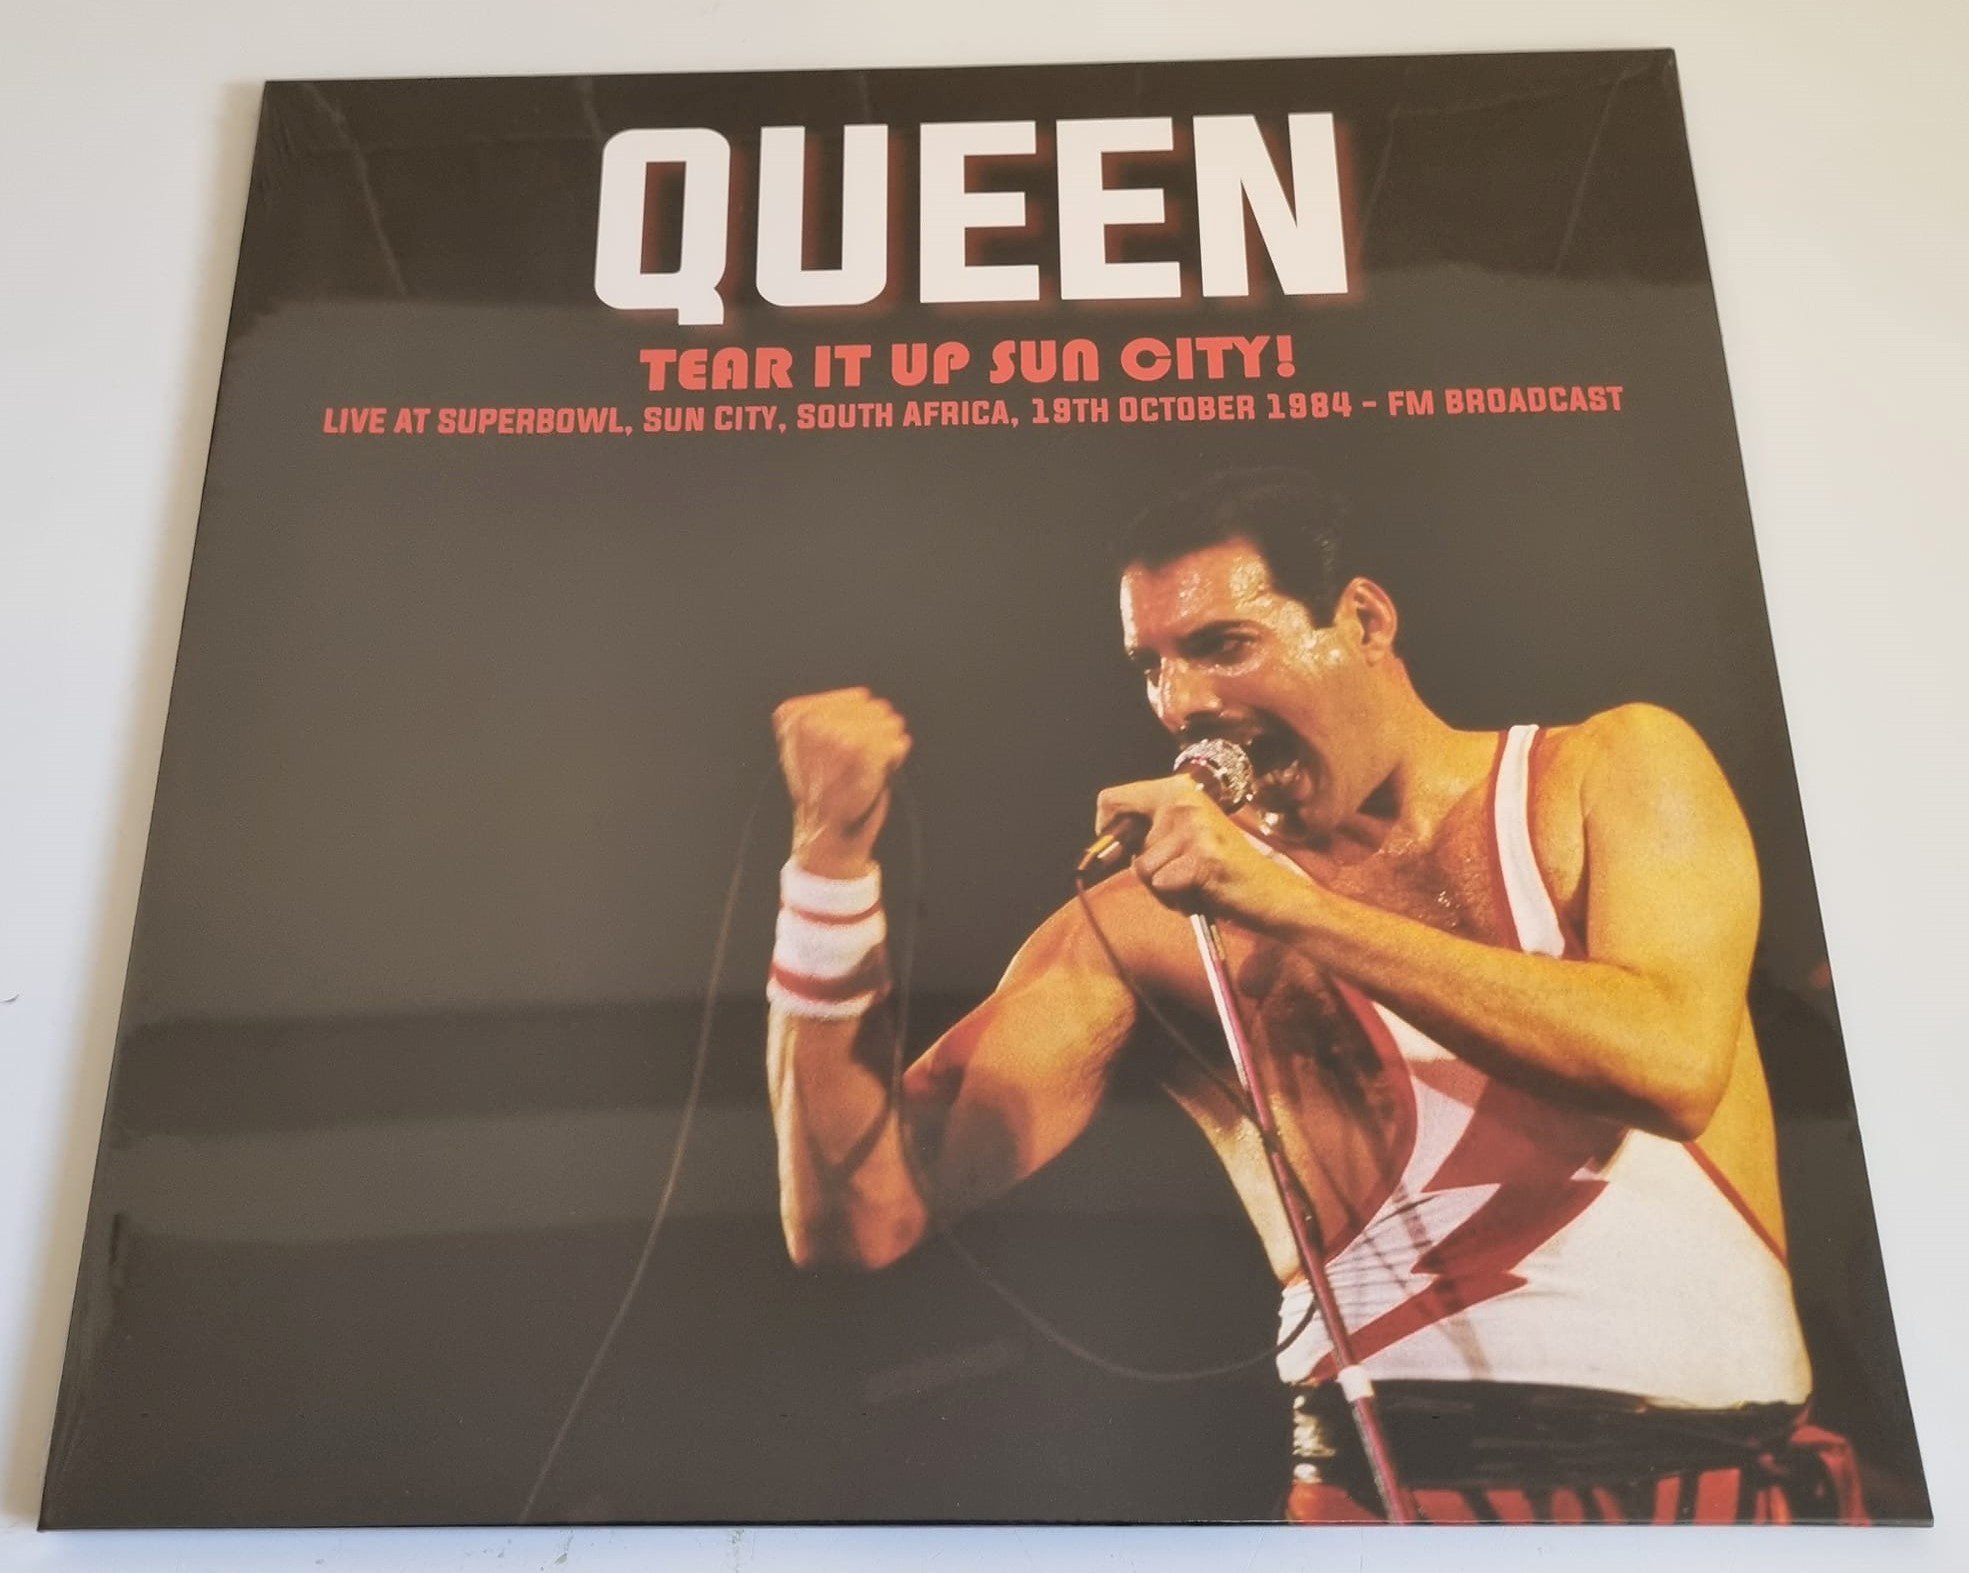 Buy this rare Queen Record by Clicking Here